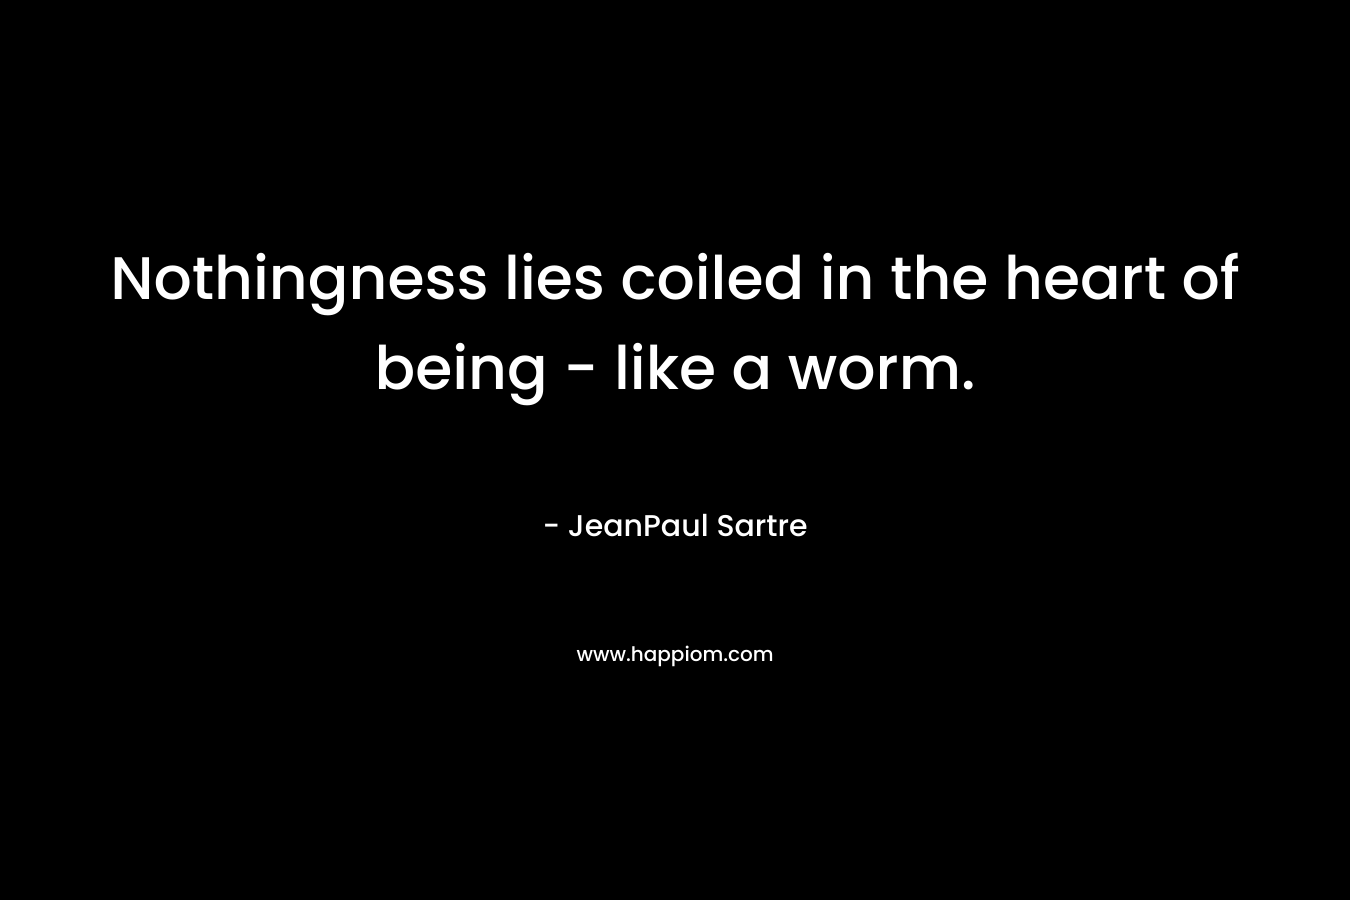 Nothingness lies coiled in the heart of being - like a worm.